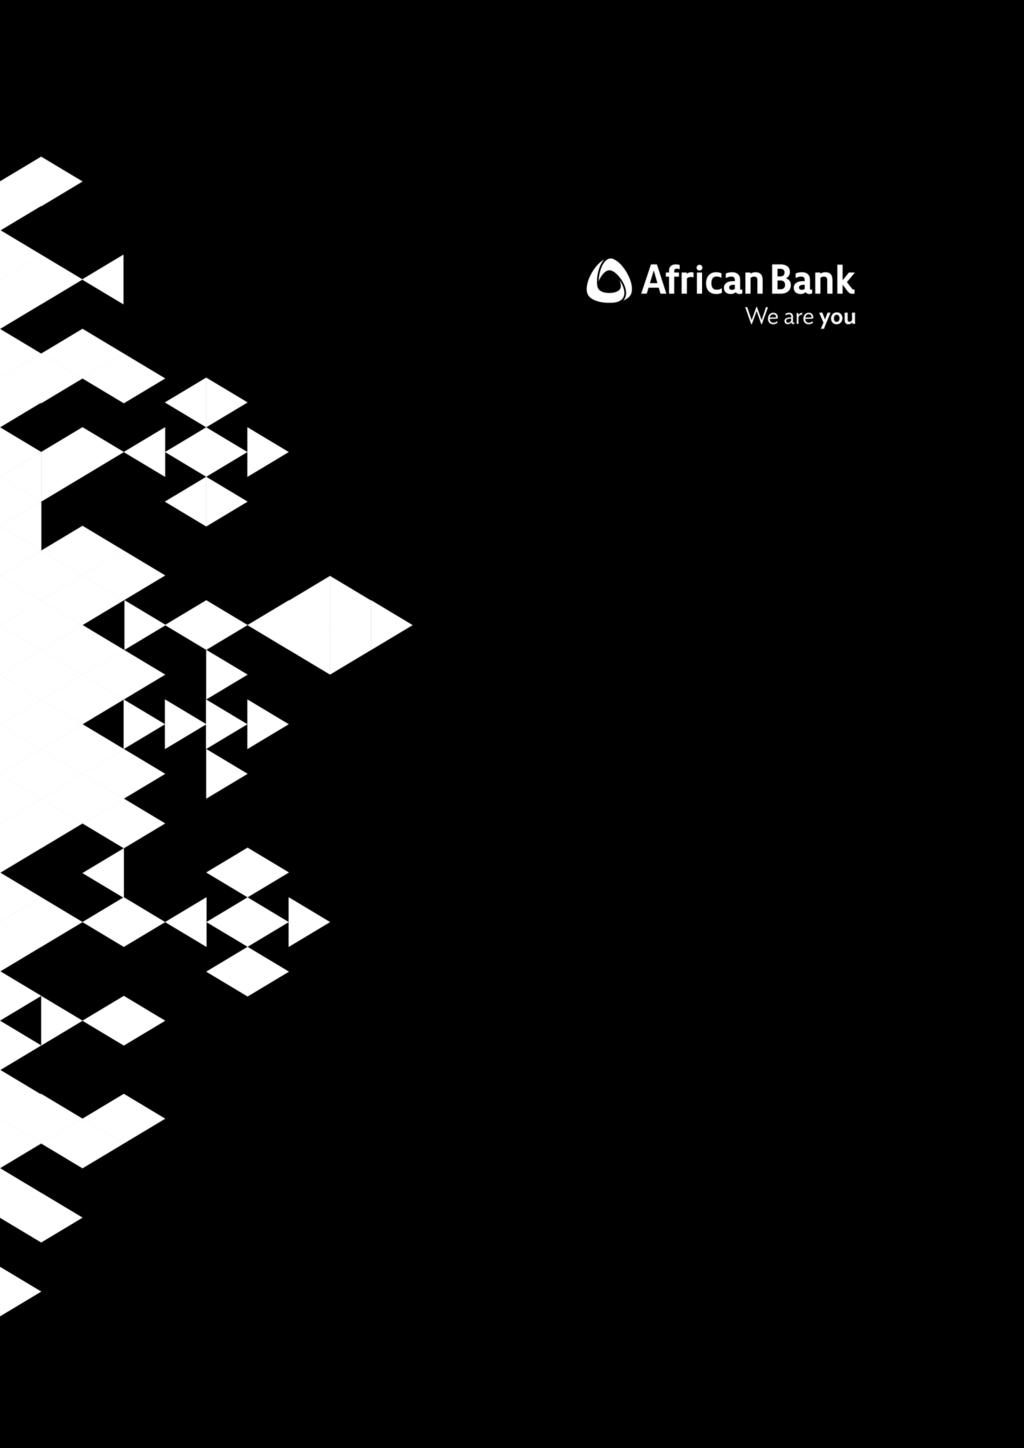 African Bank Holdings Limited and African Bank Limited Public